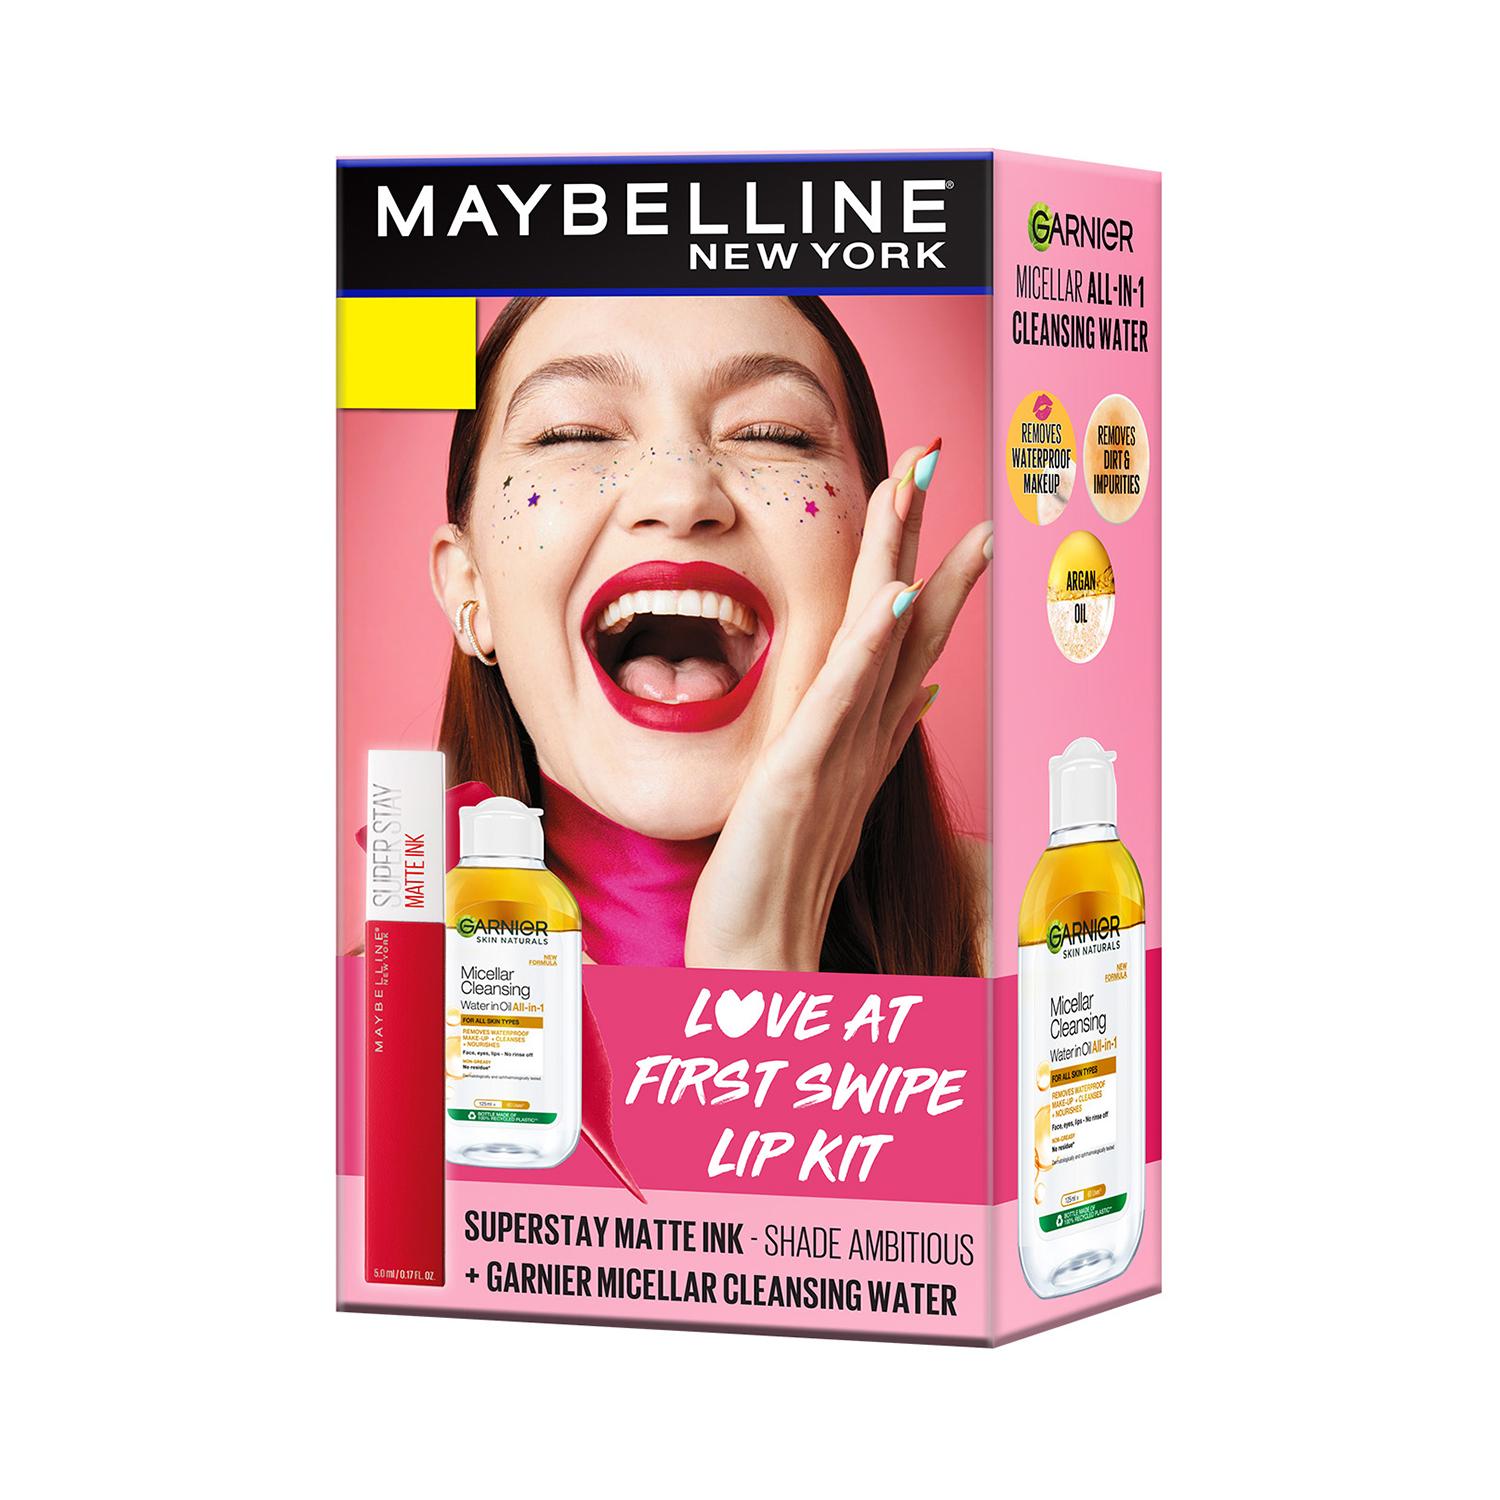 Maybelline New York | Maybelline Love at First Swipe Lip Kit - Superstay Matte Ink Ambitious + Garnier Biphase Micellar